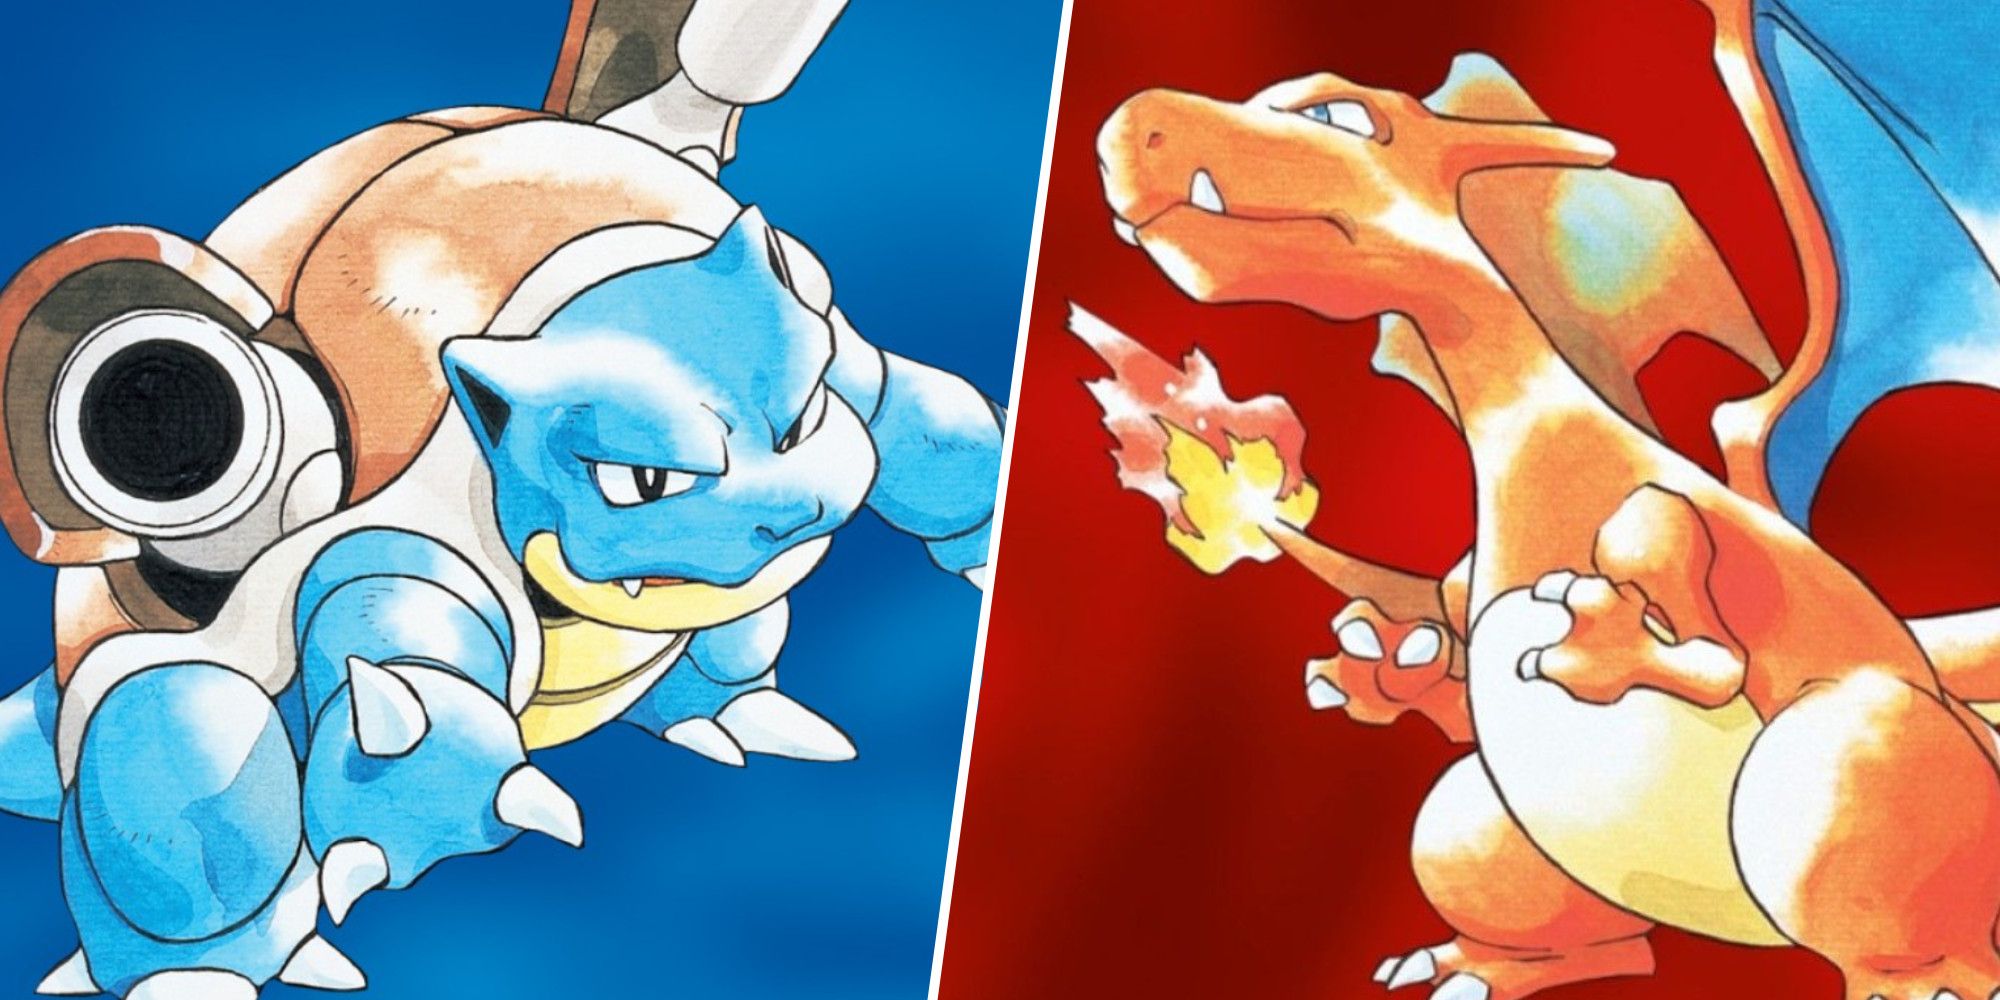 Blastoise and Charizard from Pokemon Red and Blue